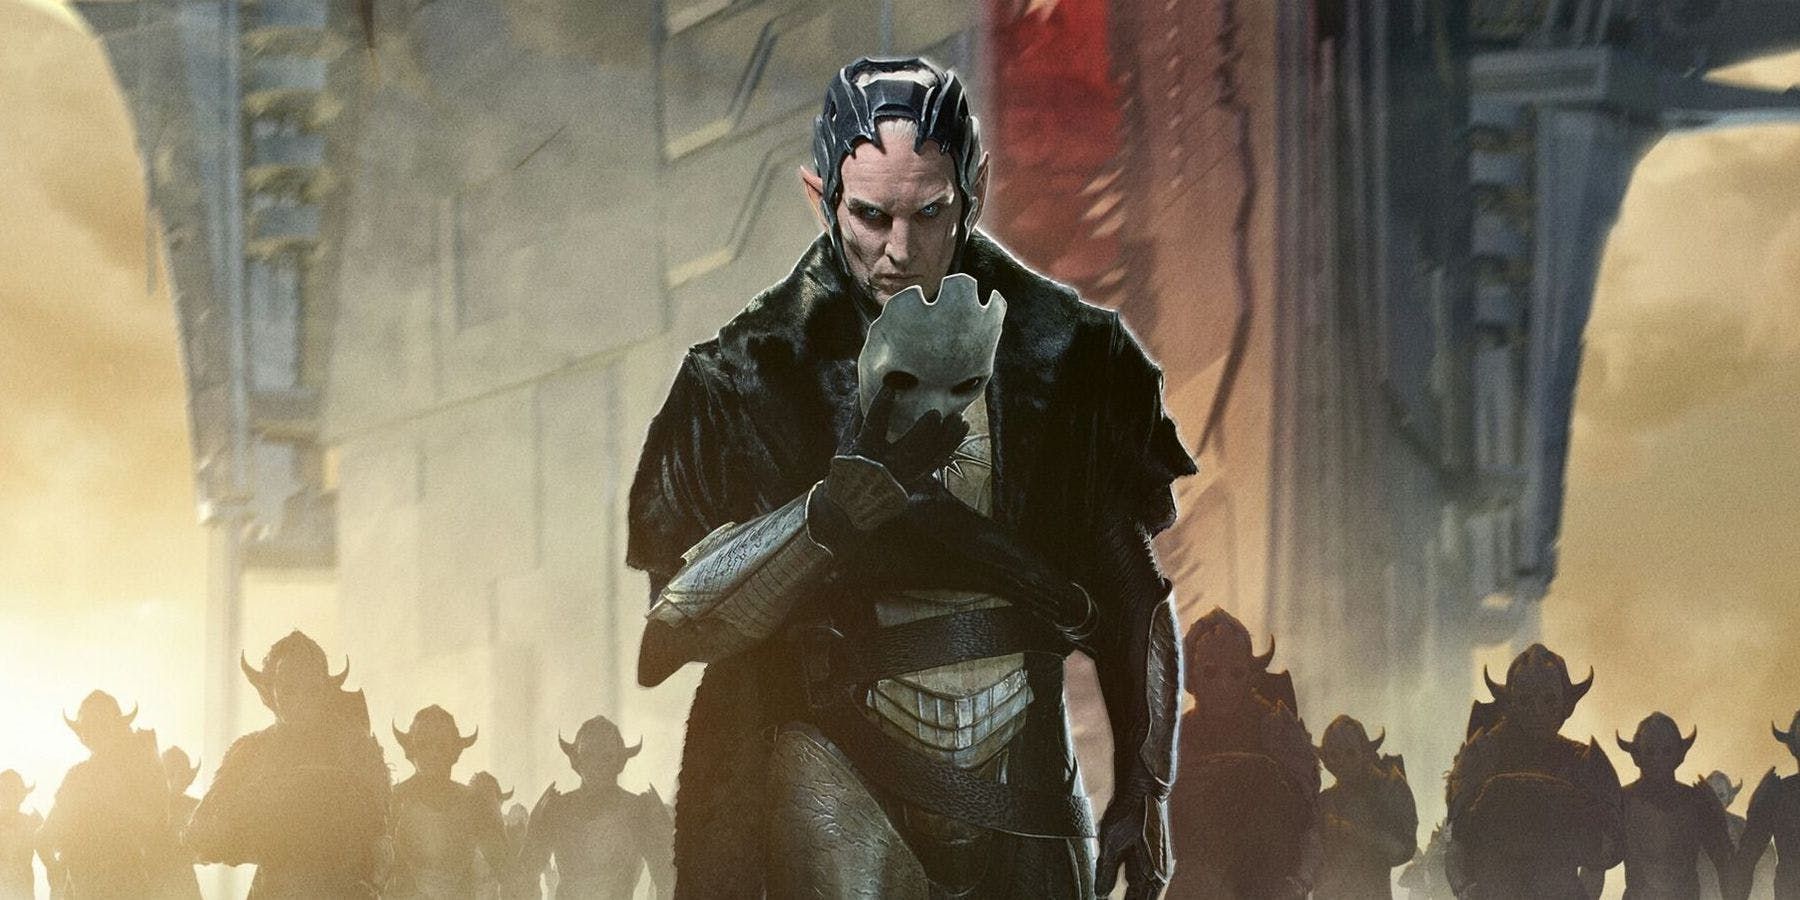 Malekith, Thor: The Dark World's primary antagonist walking and holding a mask.